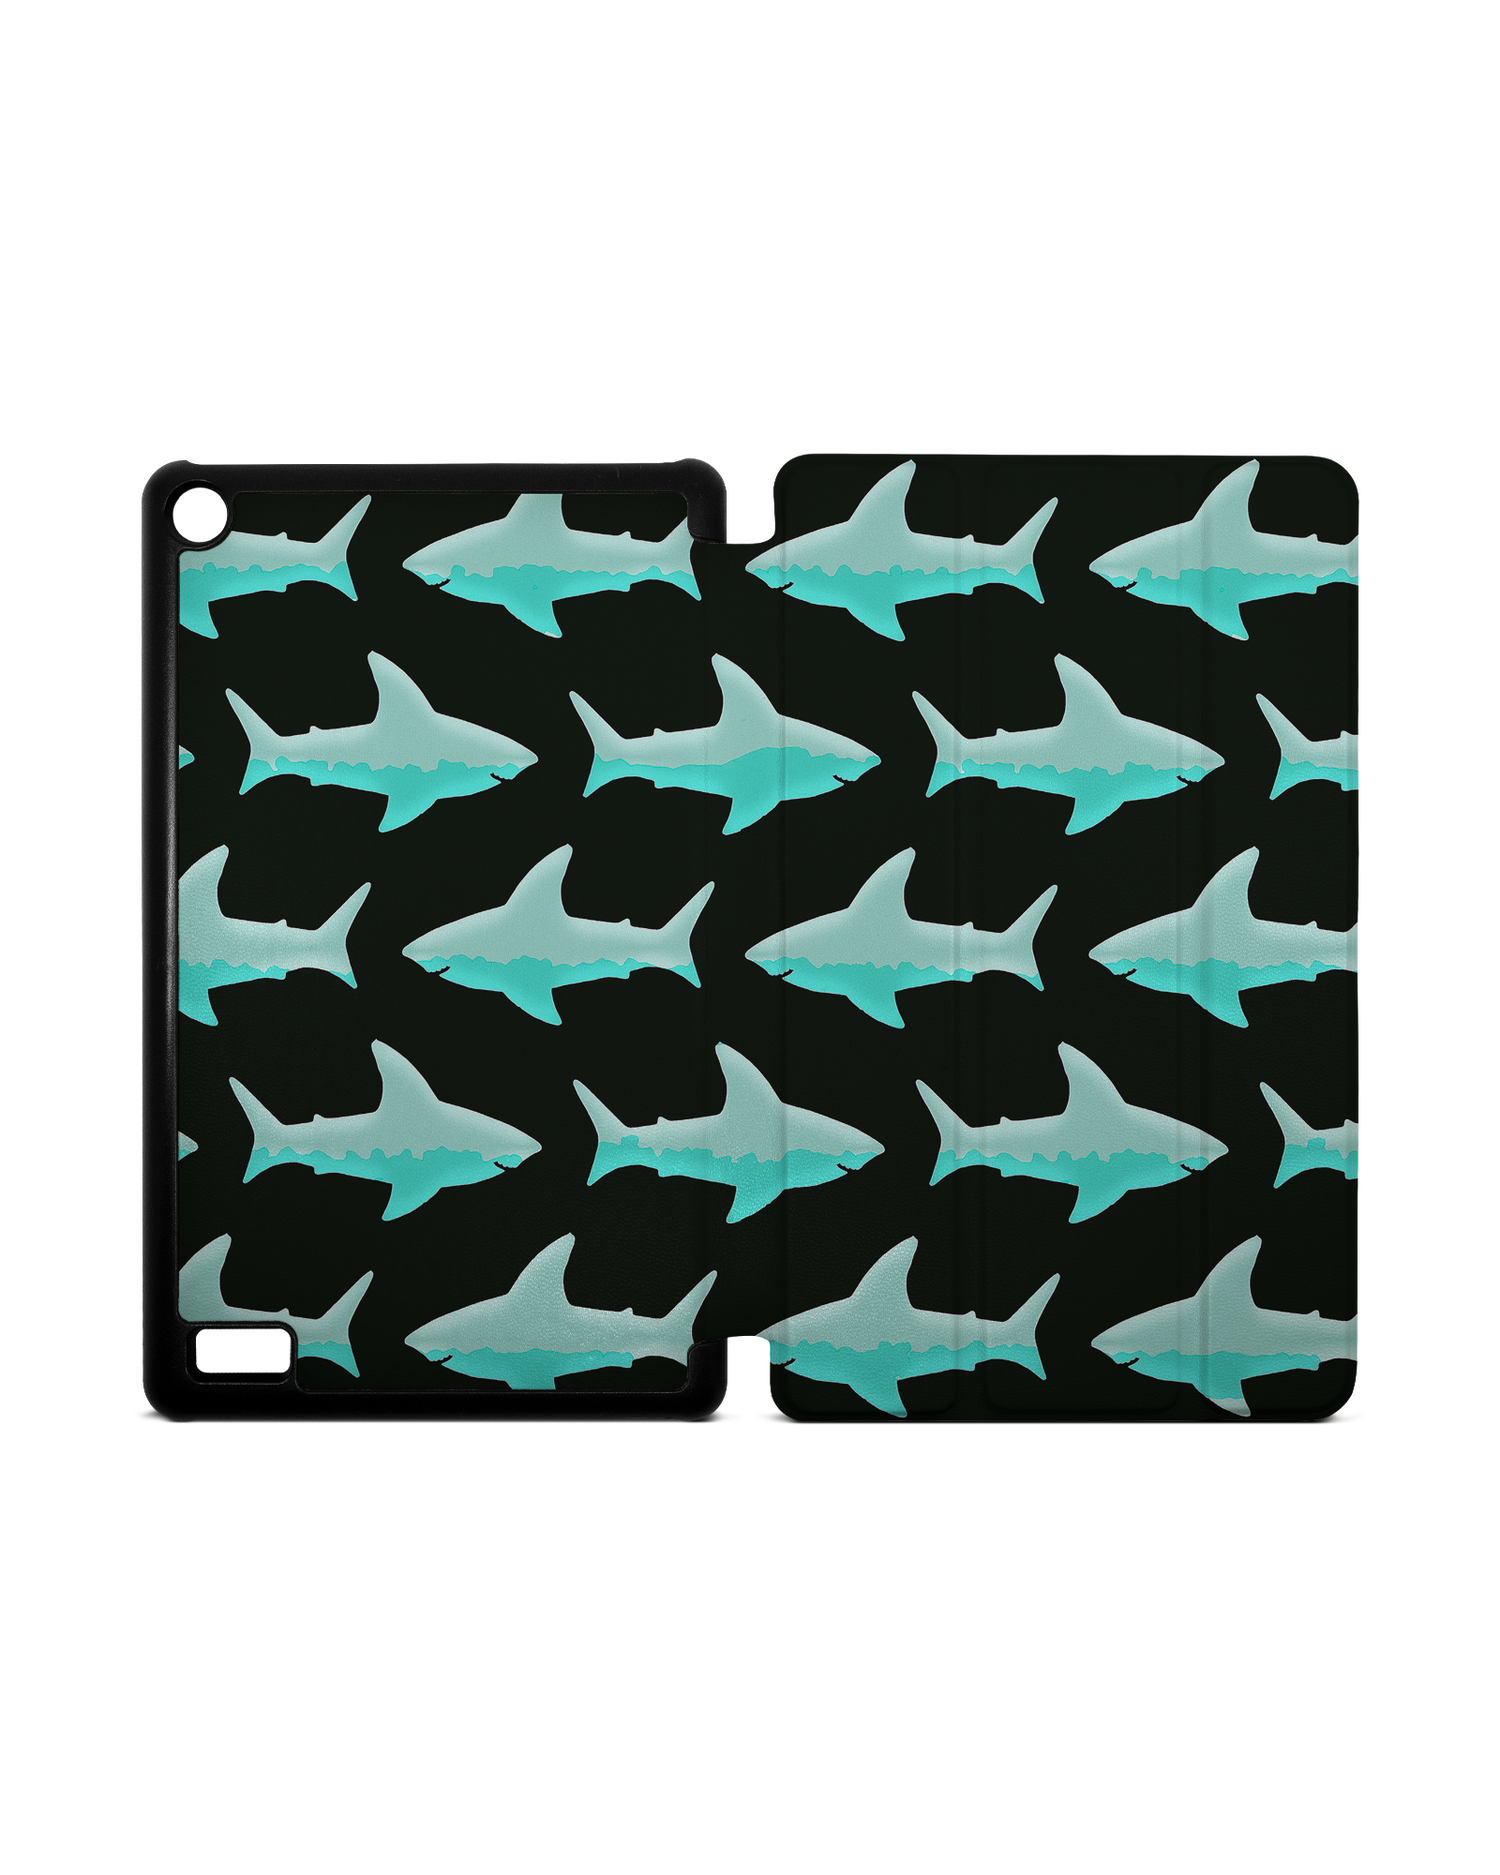 Neon Sharks Tablet Smart Case for Amazon Fire 7: Opened